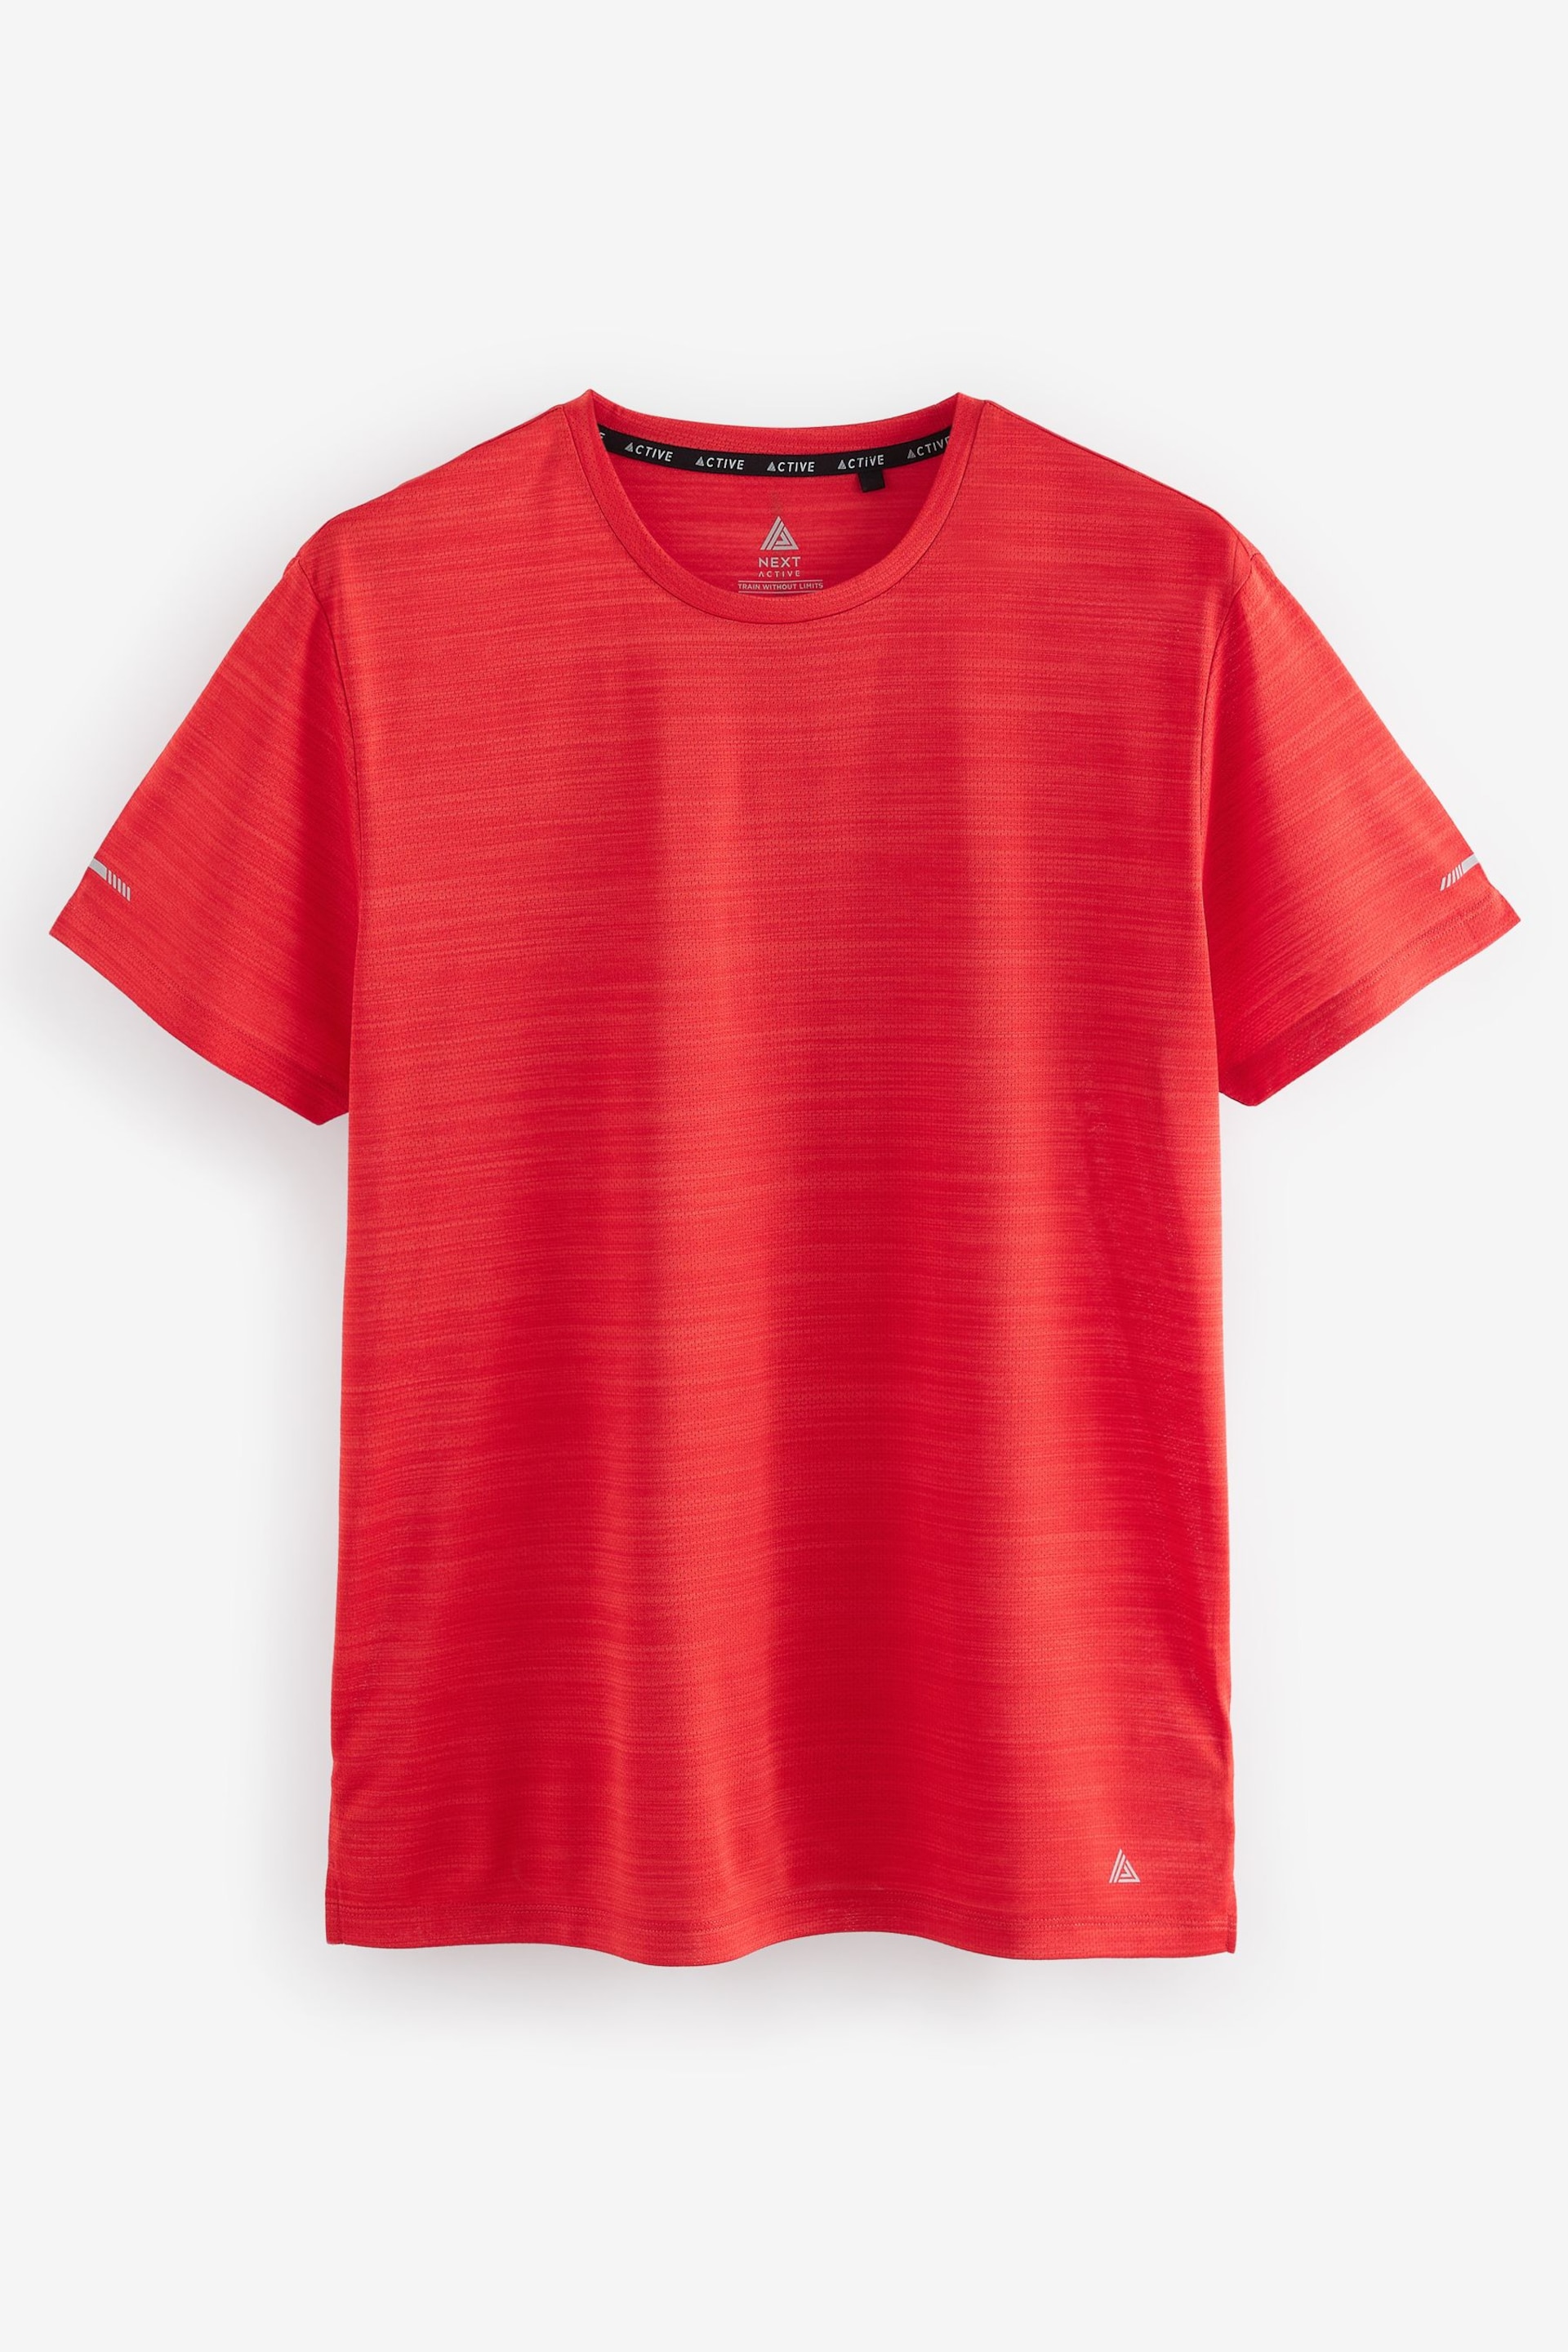 Red Active Mesh Training T-Shirt - Image 8 of 10